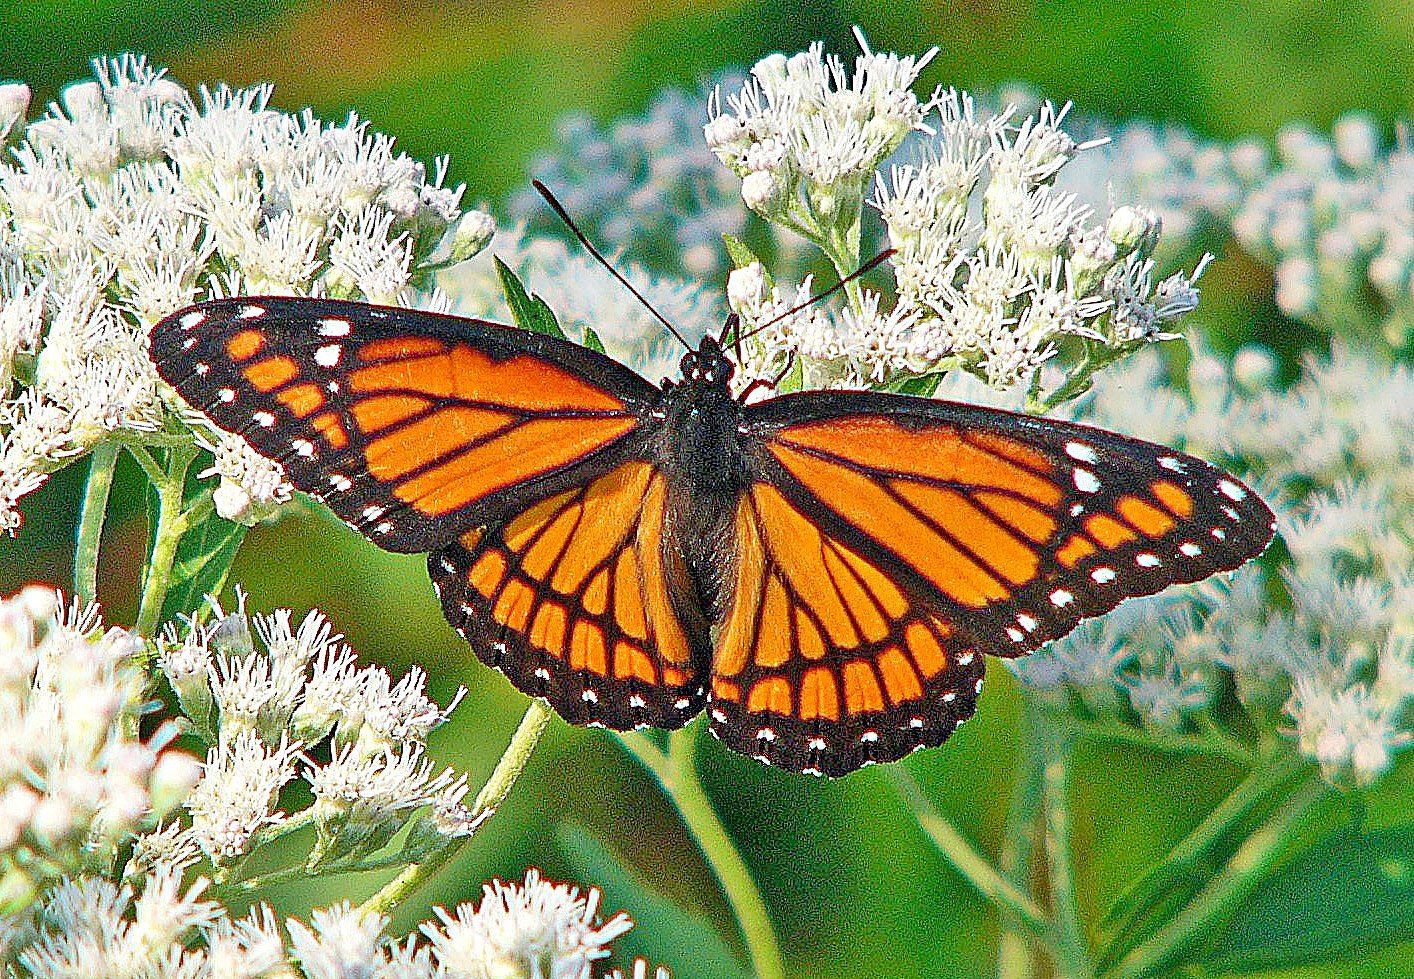 Viceroy butterfly photo by Larry Meade